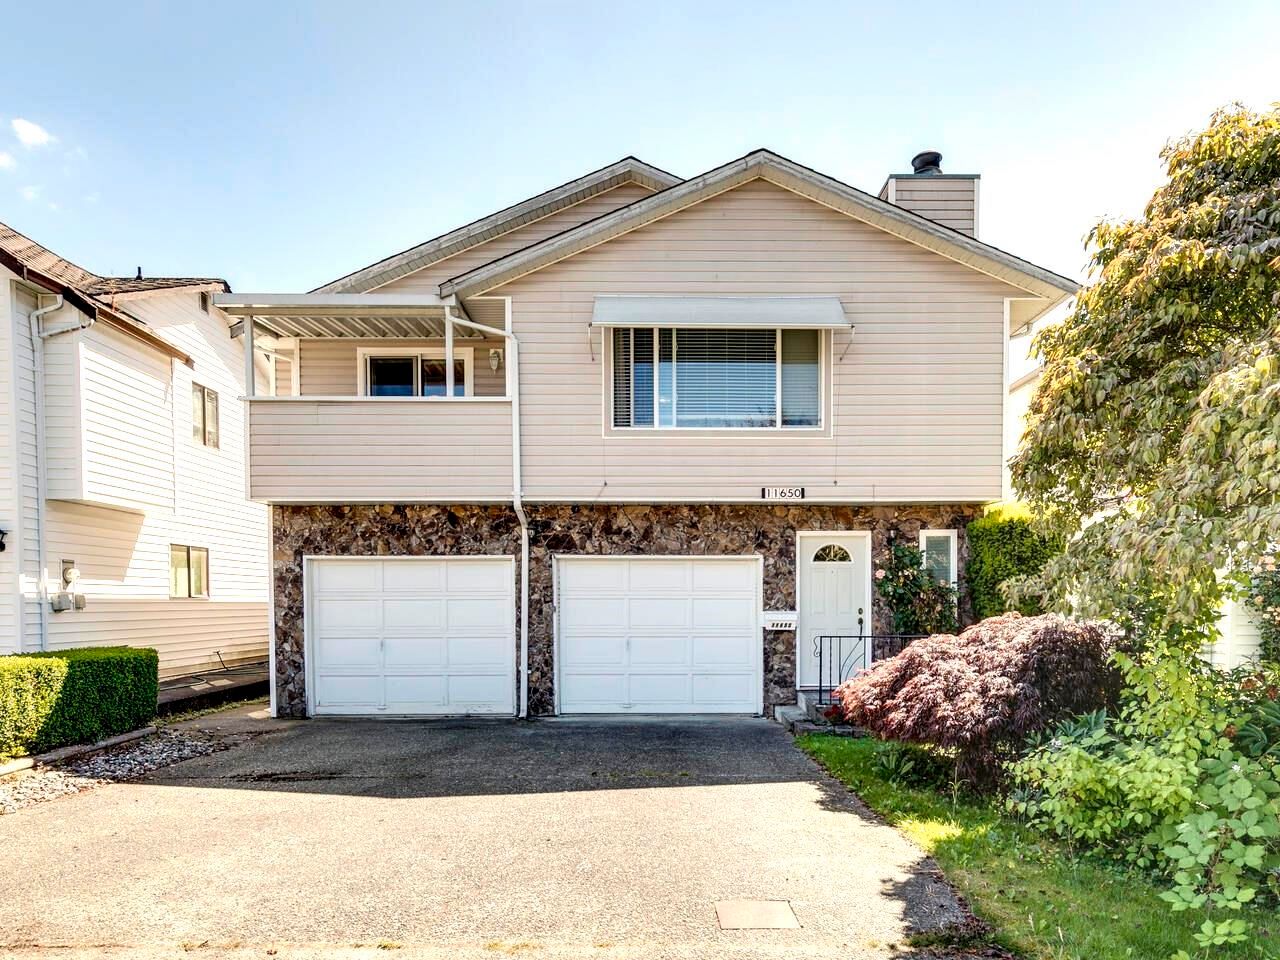 Open House on Sunday, August 21, 2022 1:00PM - 3:00PM
Gramma's house.  Spotless, gently lived in, a great location & at this new price, a great buy for a serious Buyer.  See for yourself.  You'll be very glad you did!